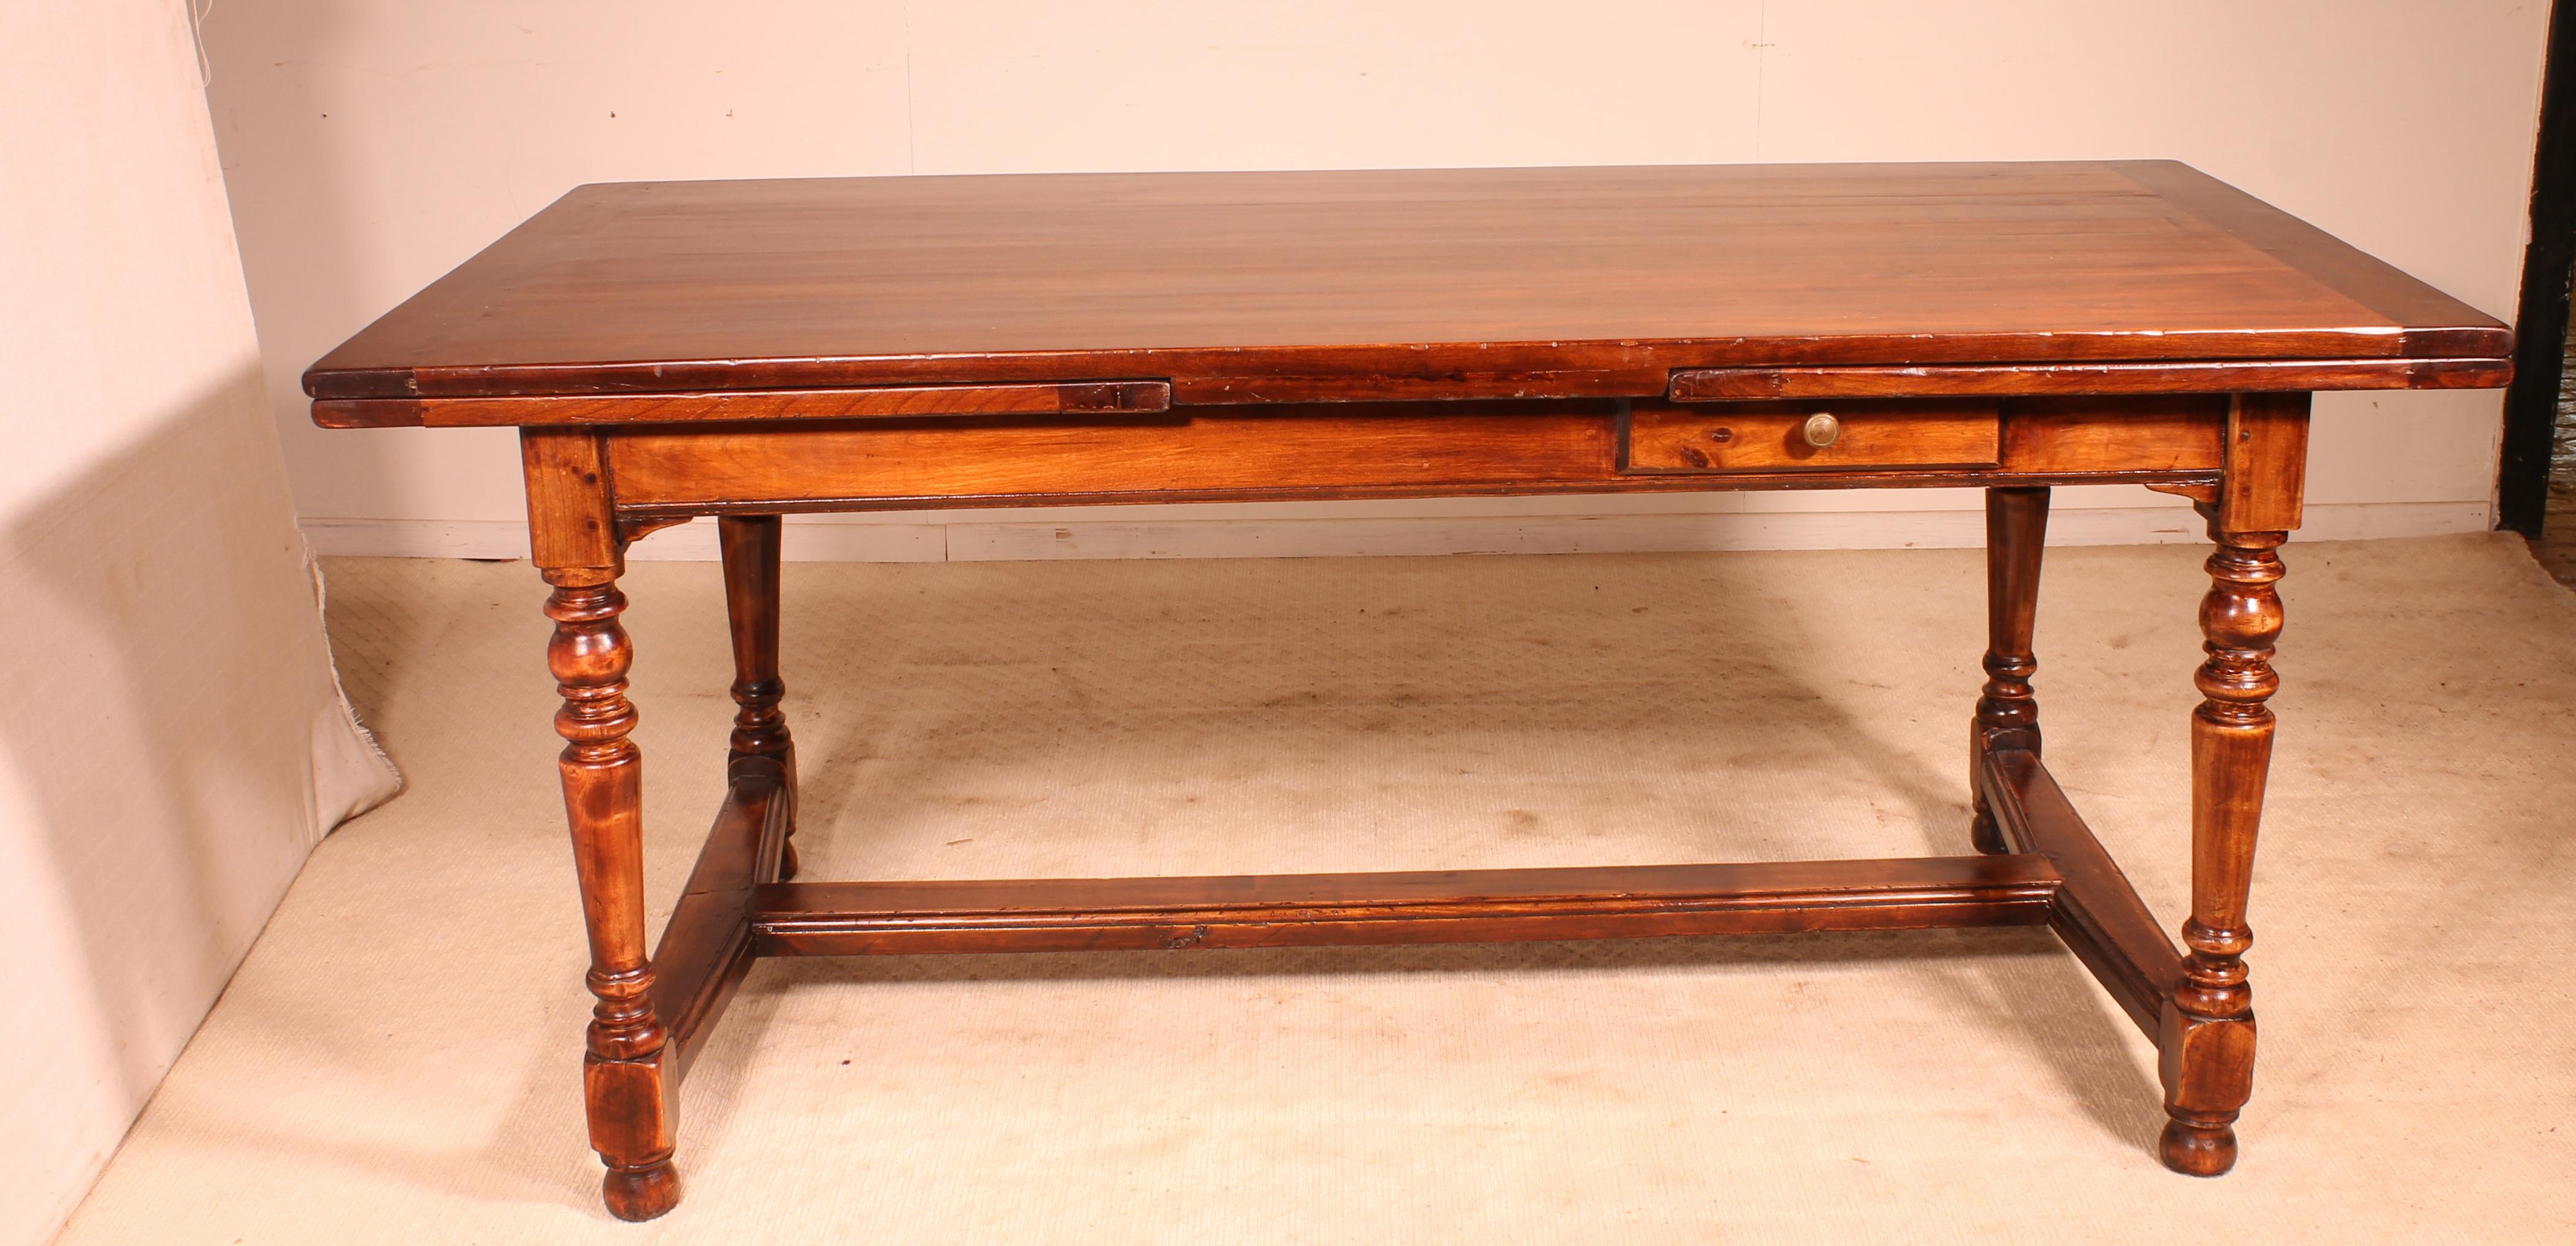 Dutch Extending Table with Turned Feets, 19th Century, France